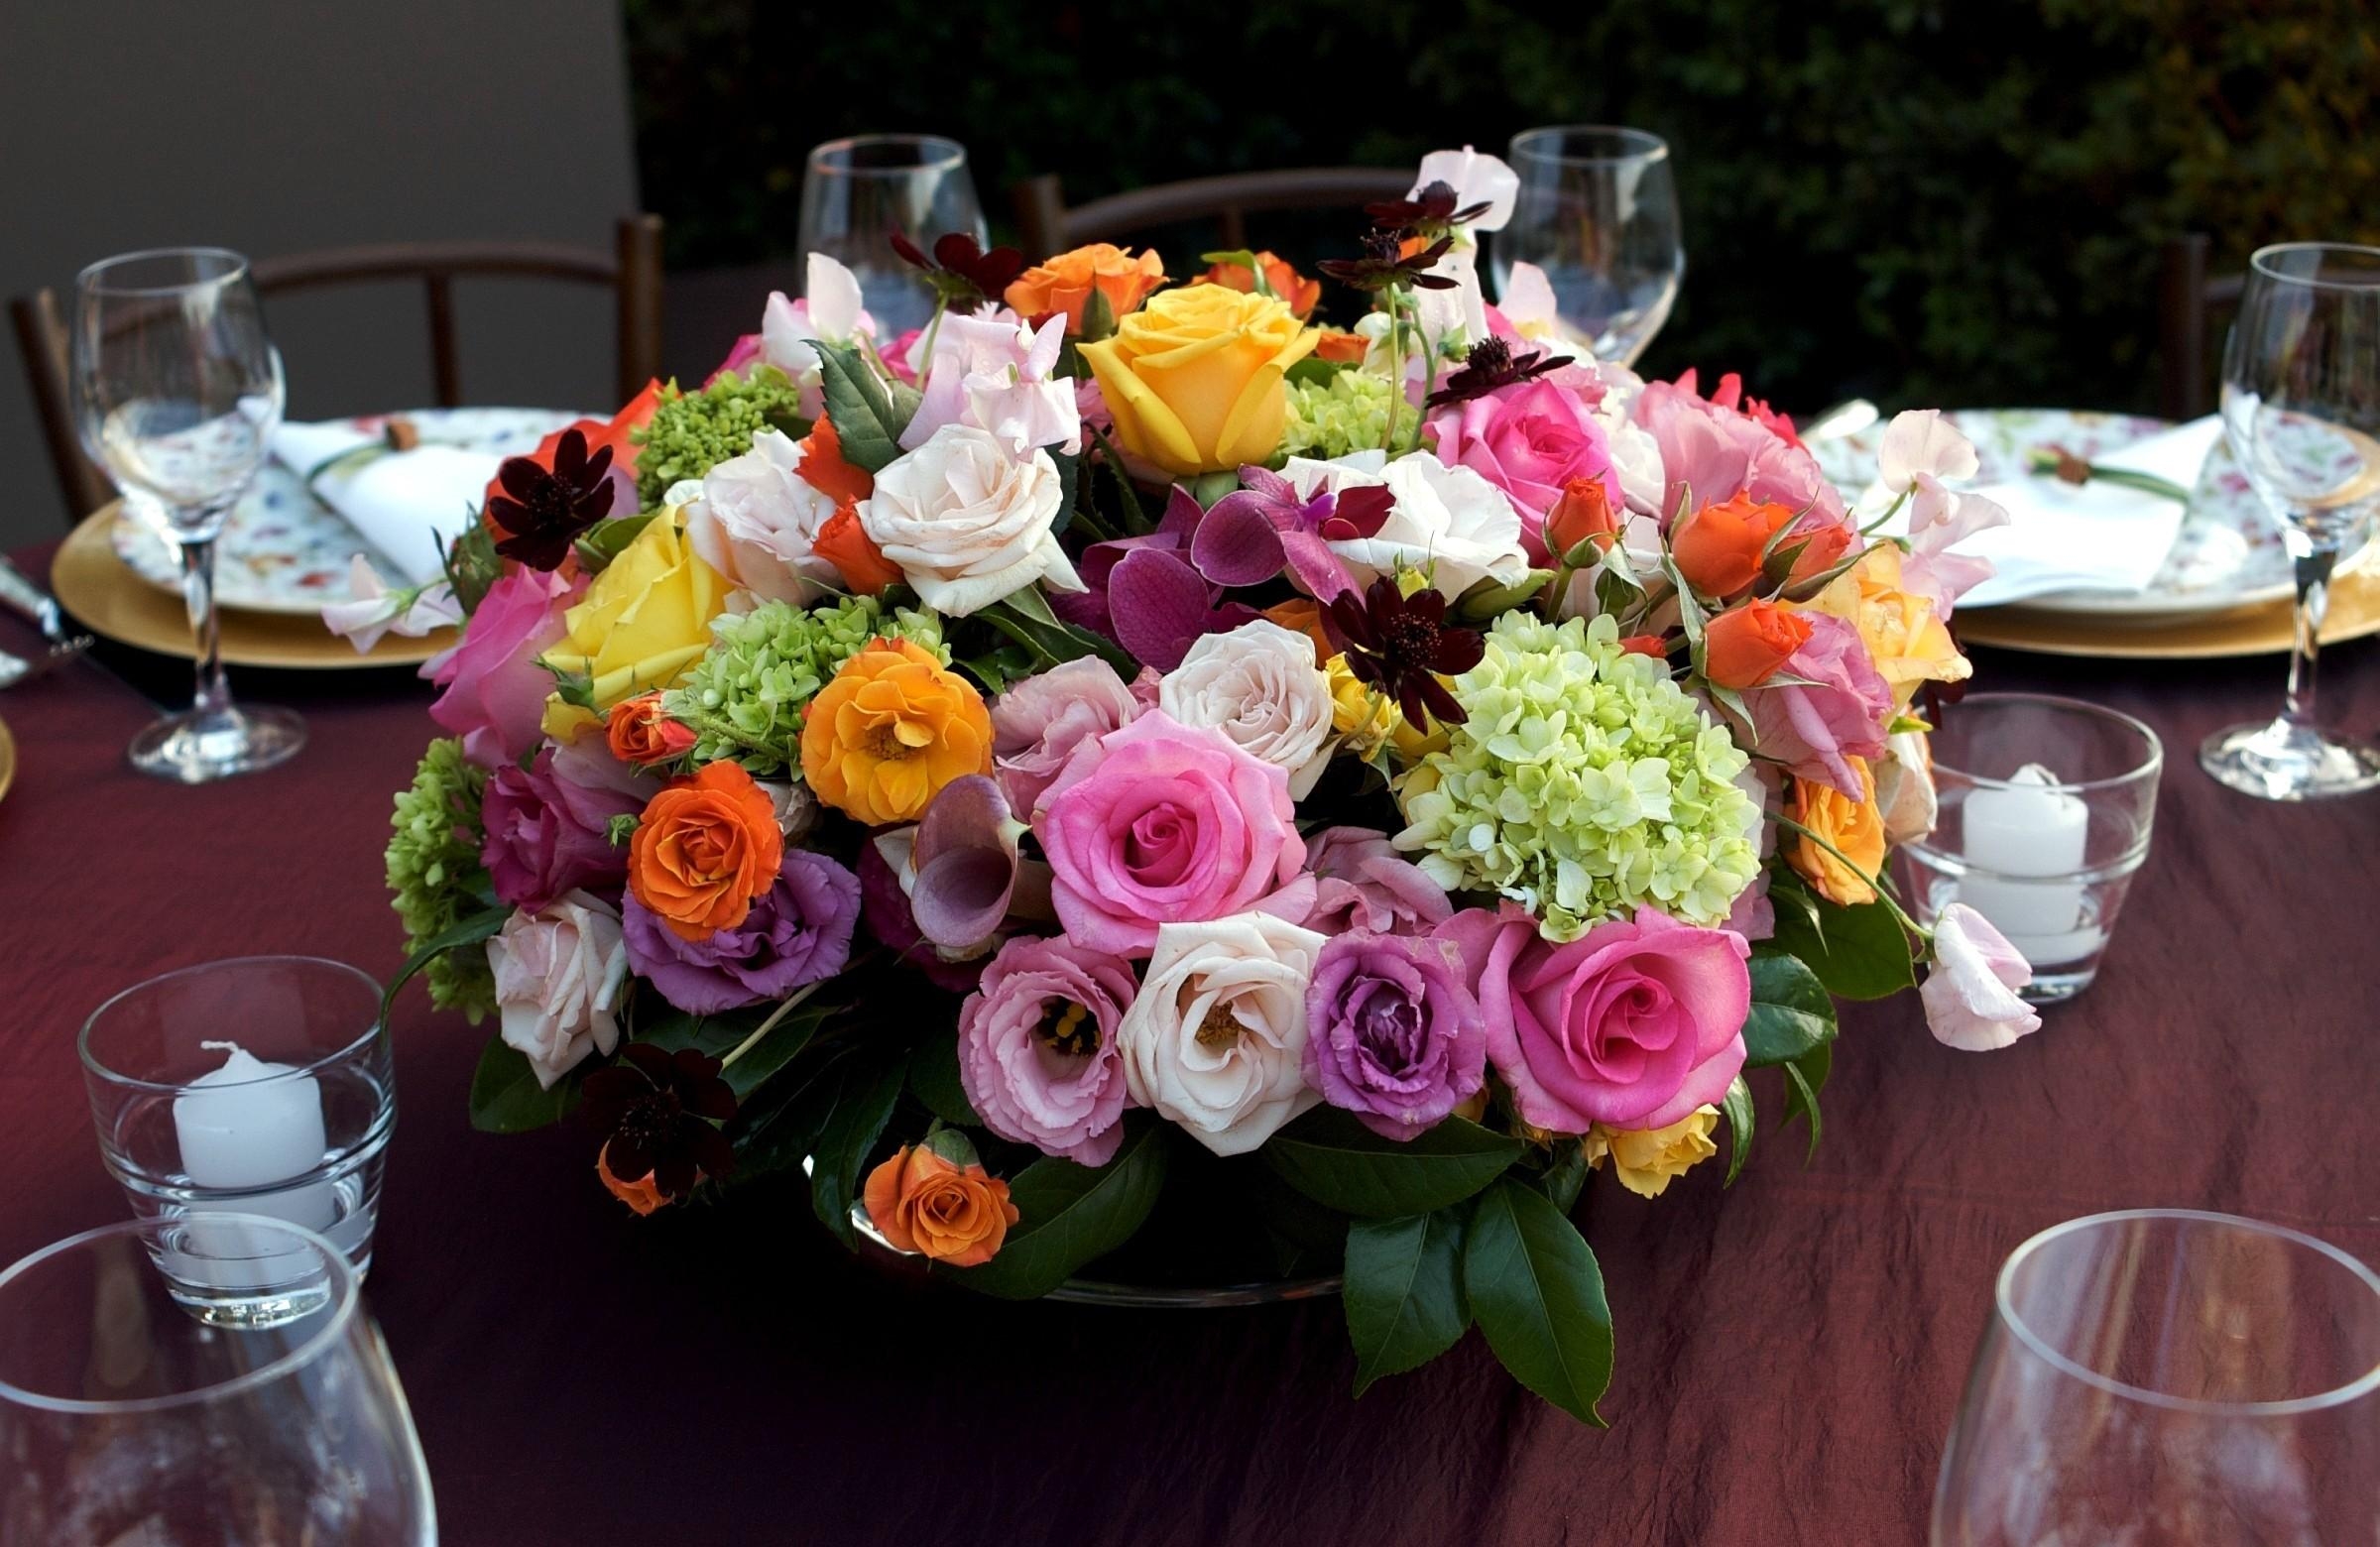 roses, flowers, candles, bouquet, table, composition, hydrangea, serving, lisianthus russell, lisiantus russell cellphone